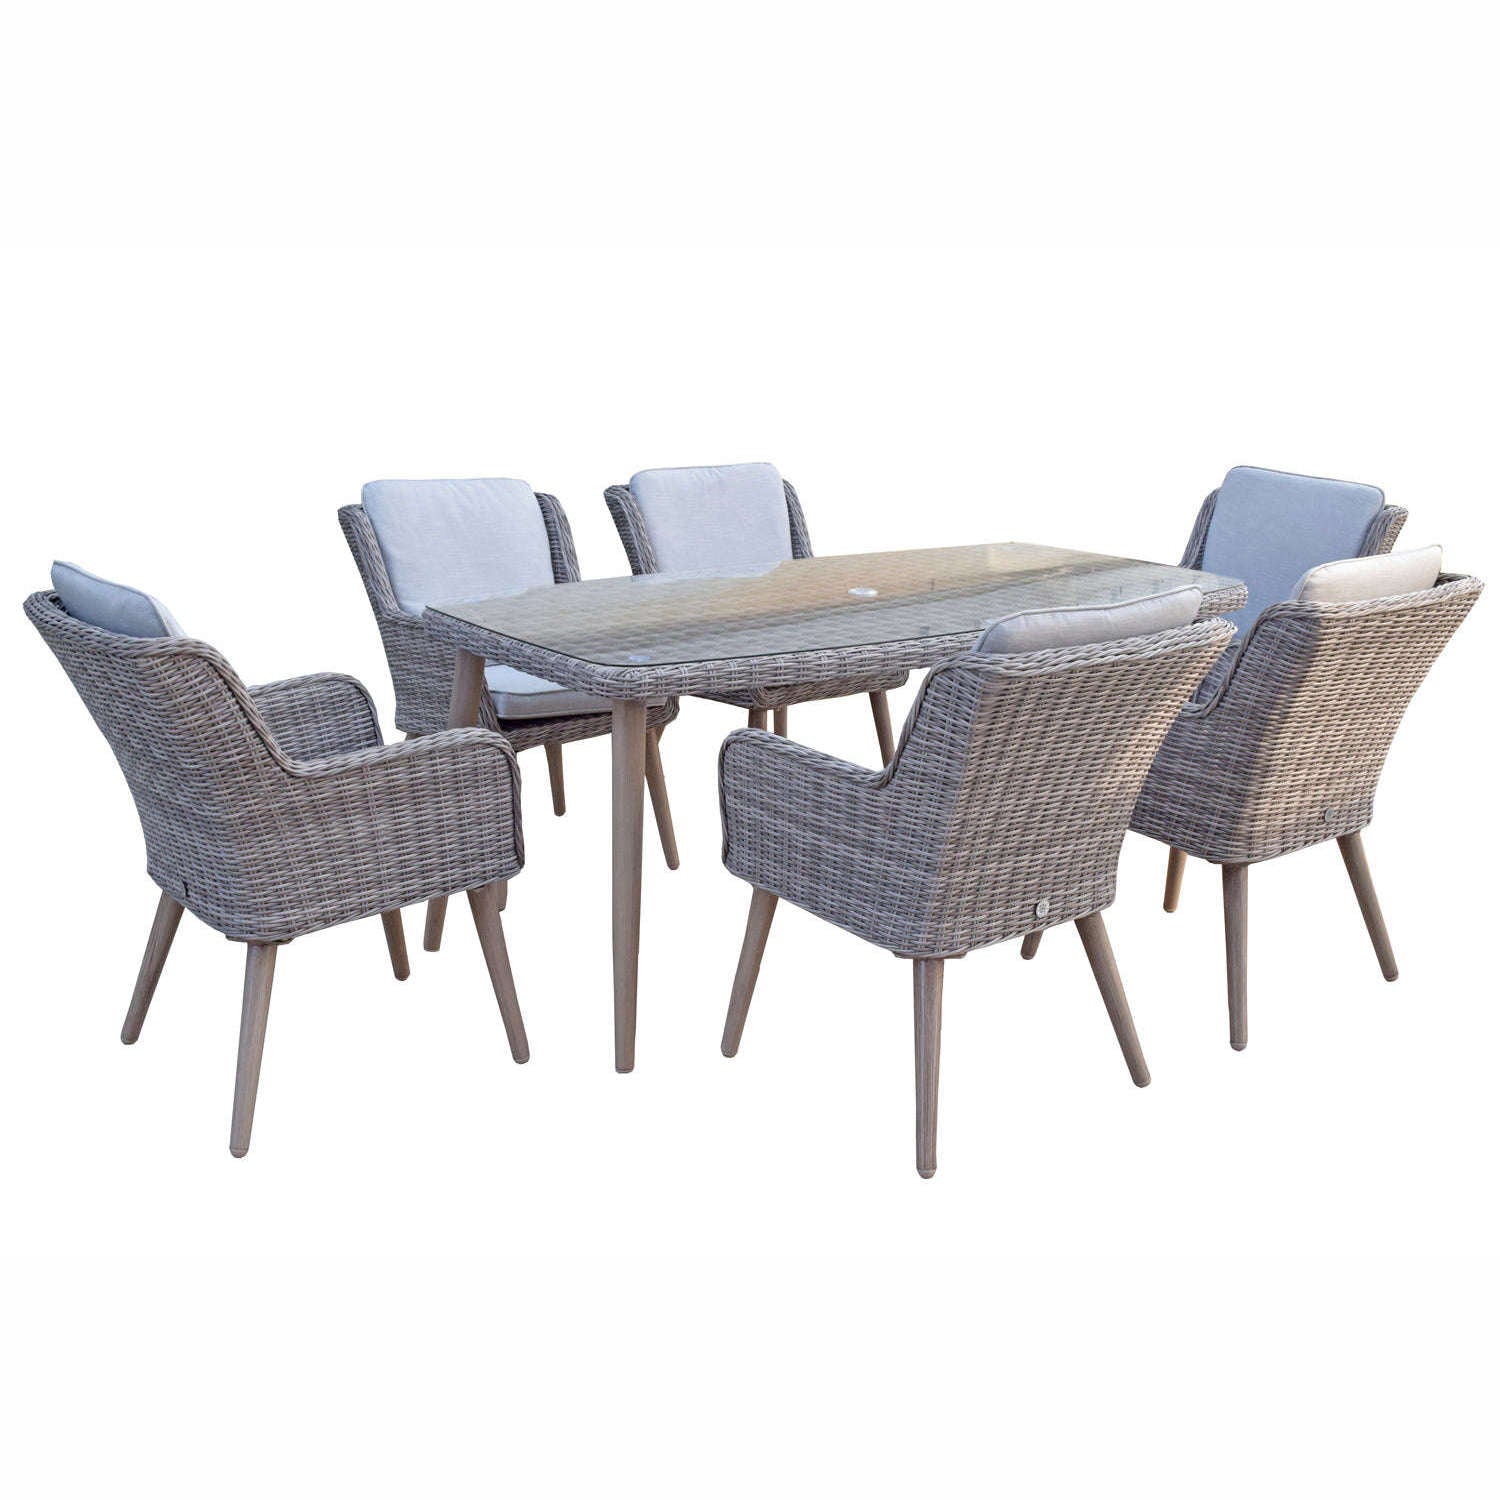 Exceptional Garden:Signature Weave Danielle 6-Seater Dining Set